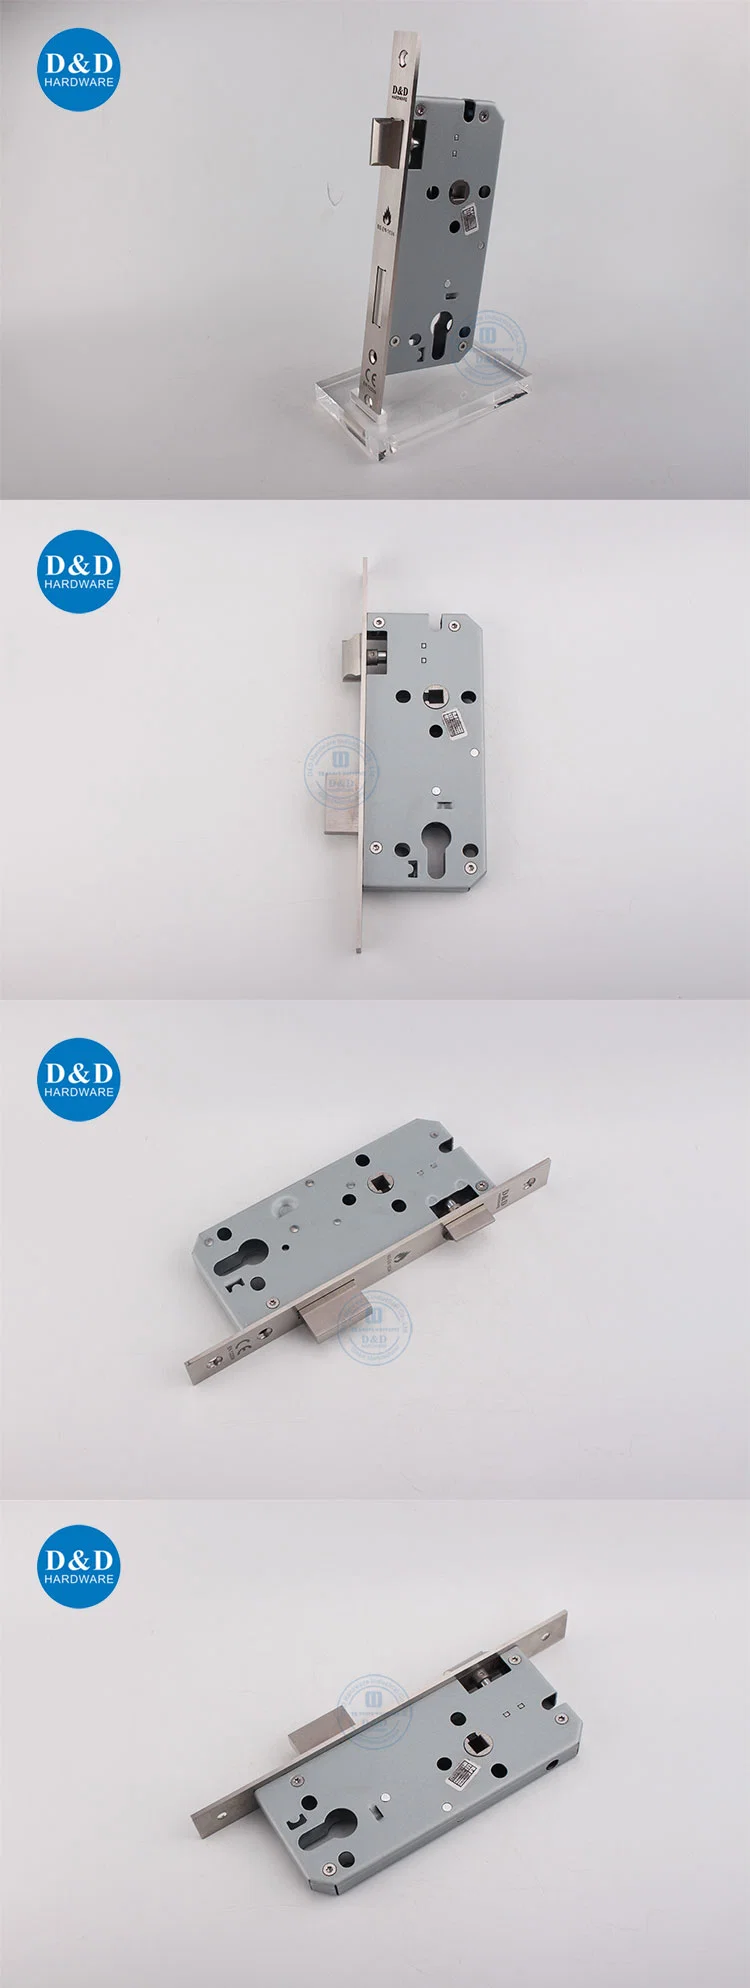 CE Stainless Steel Double Turns Deadbolt Fire Rated Sash Lock